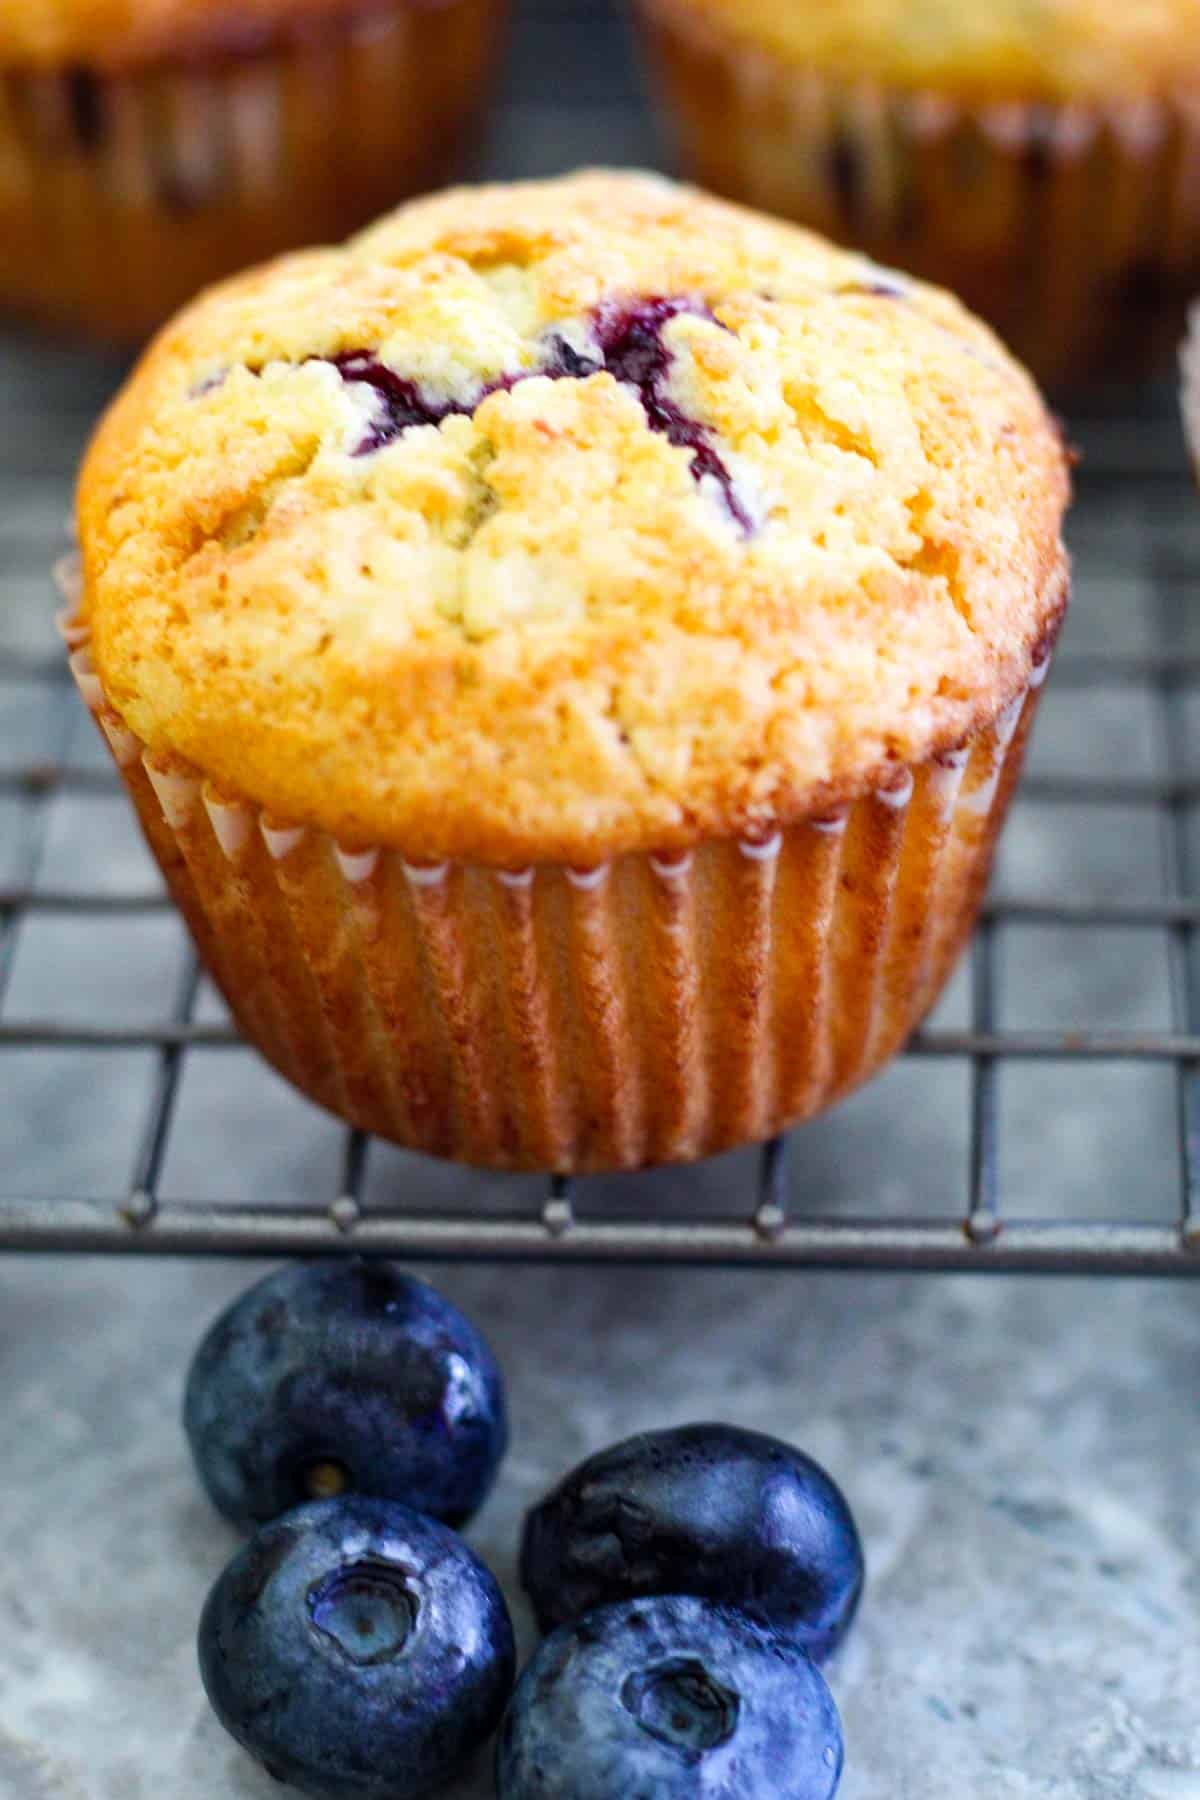 A single blueberry muffin with meyer lemon on a cooling rack. There are fresh blueberries as garnish in front.